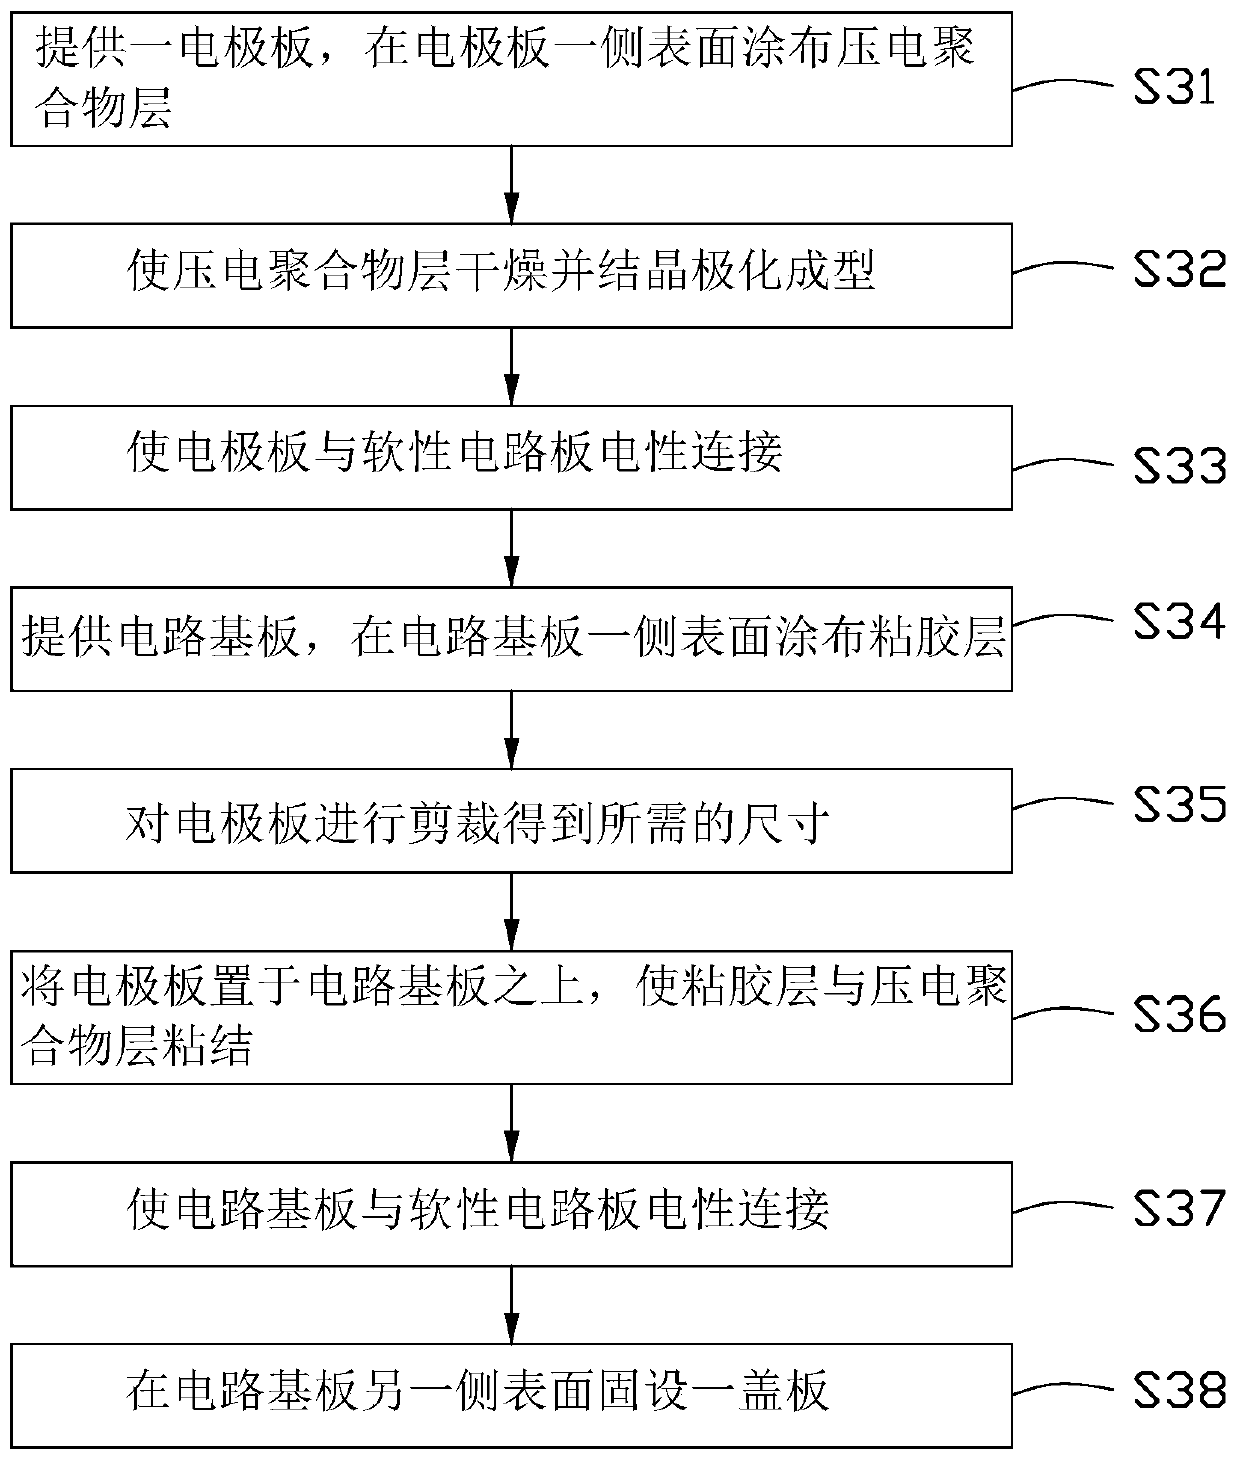 Acoustic fingerprint identification device, method for making the same, and electronic device using the same